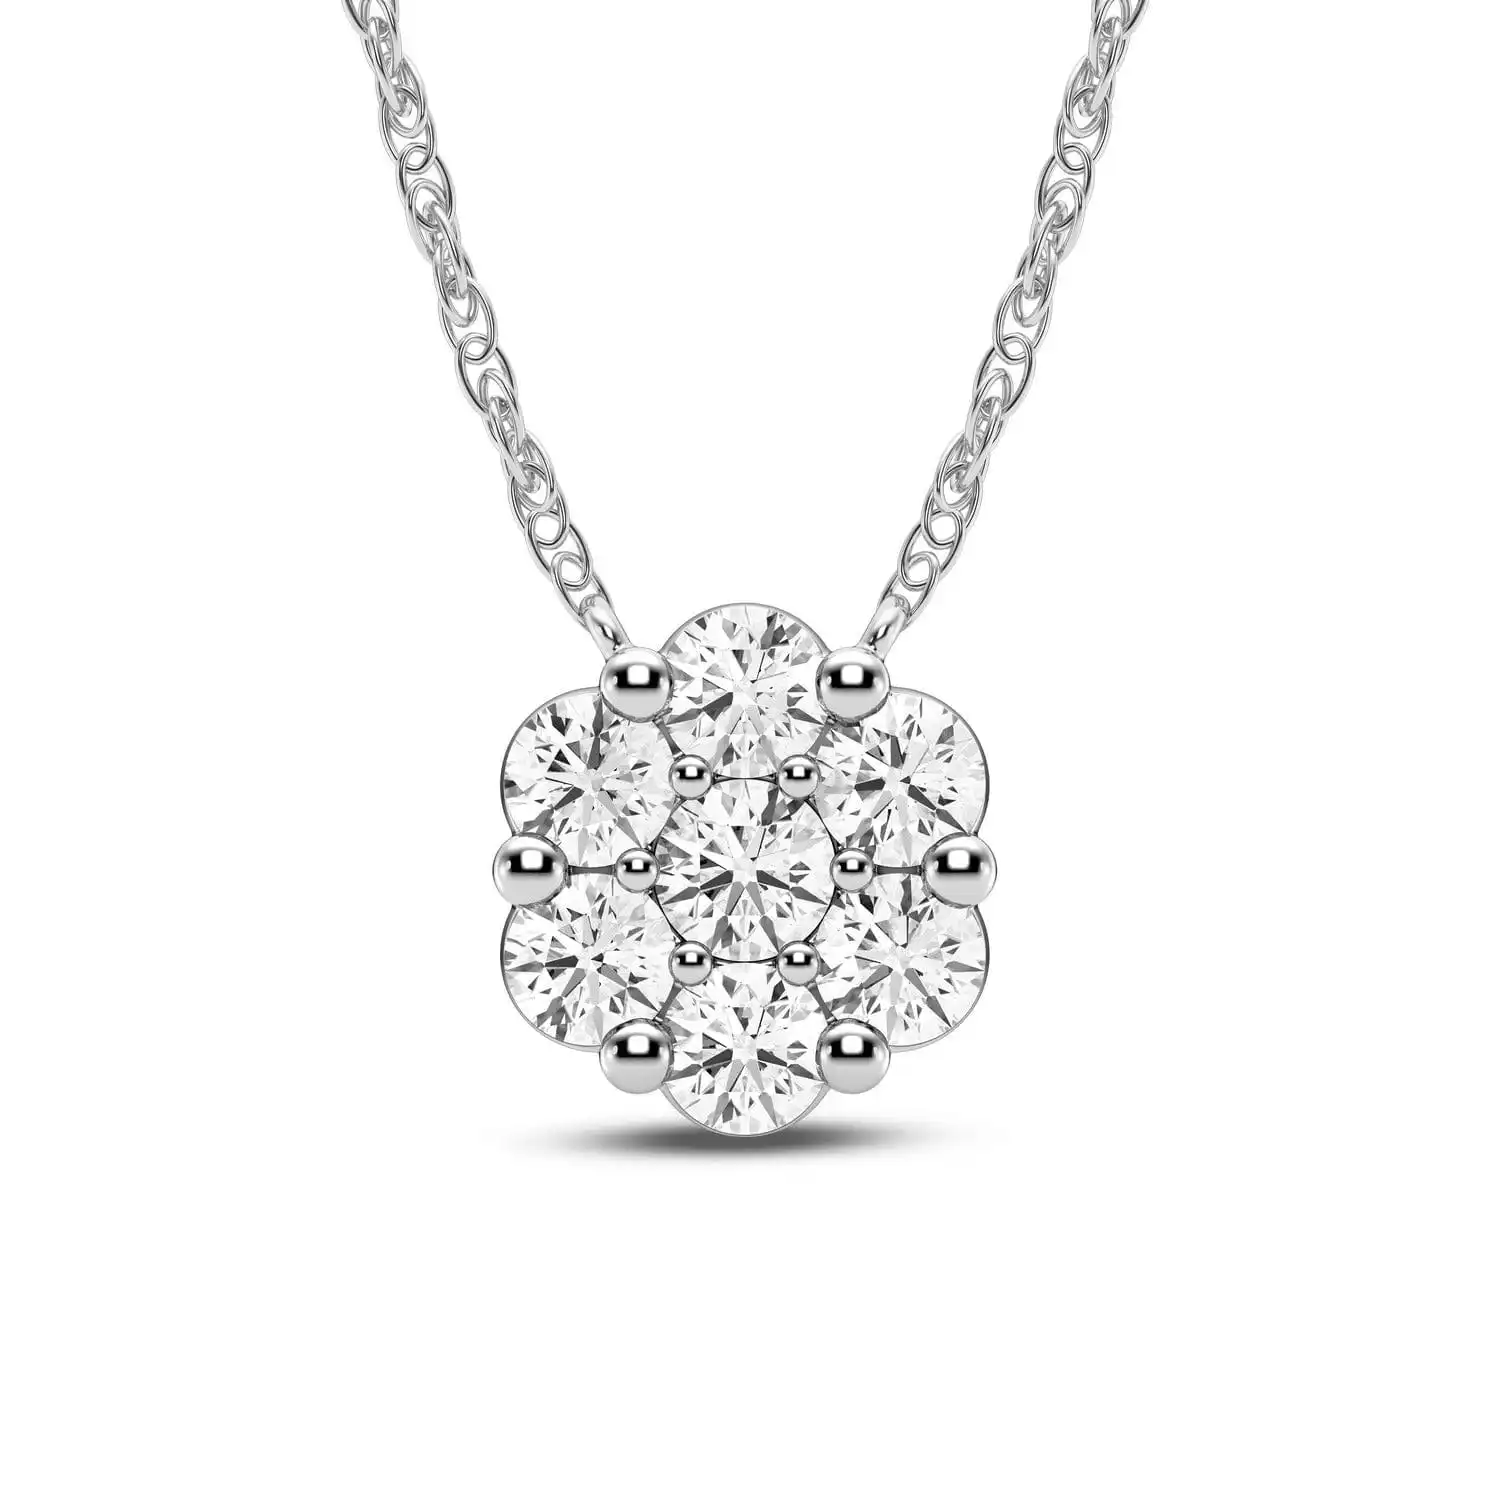 Meera Flower Necklace with 1/2ct of Laboratory Grown Diamonds in 9ct White Gold